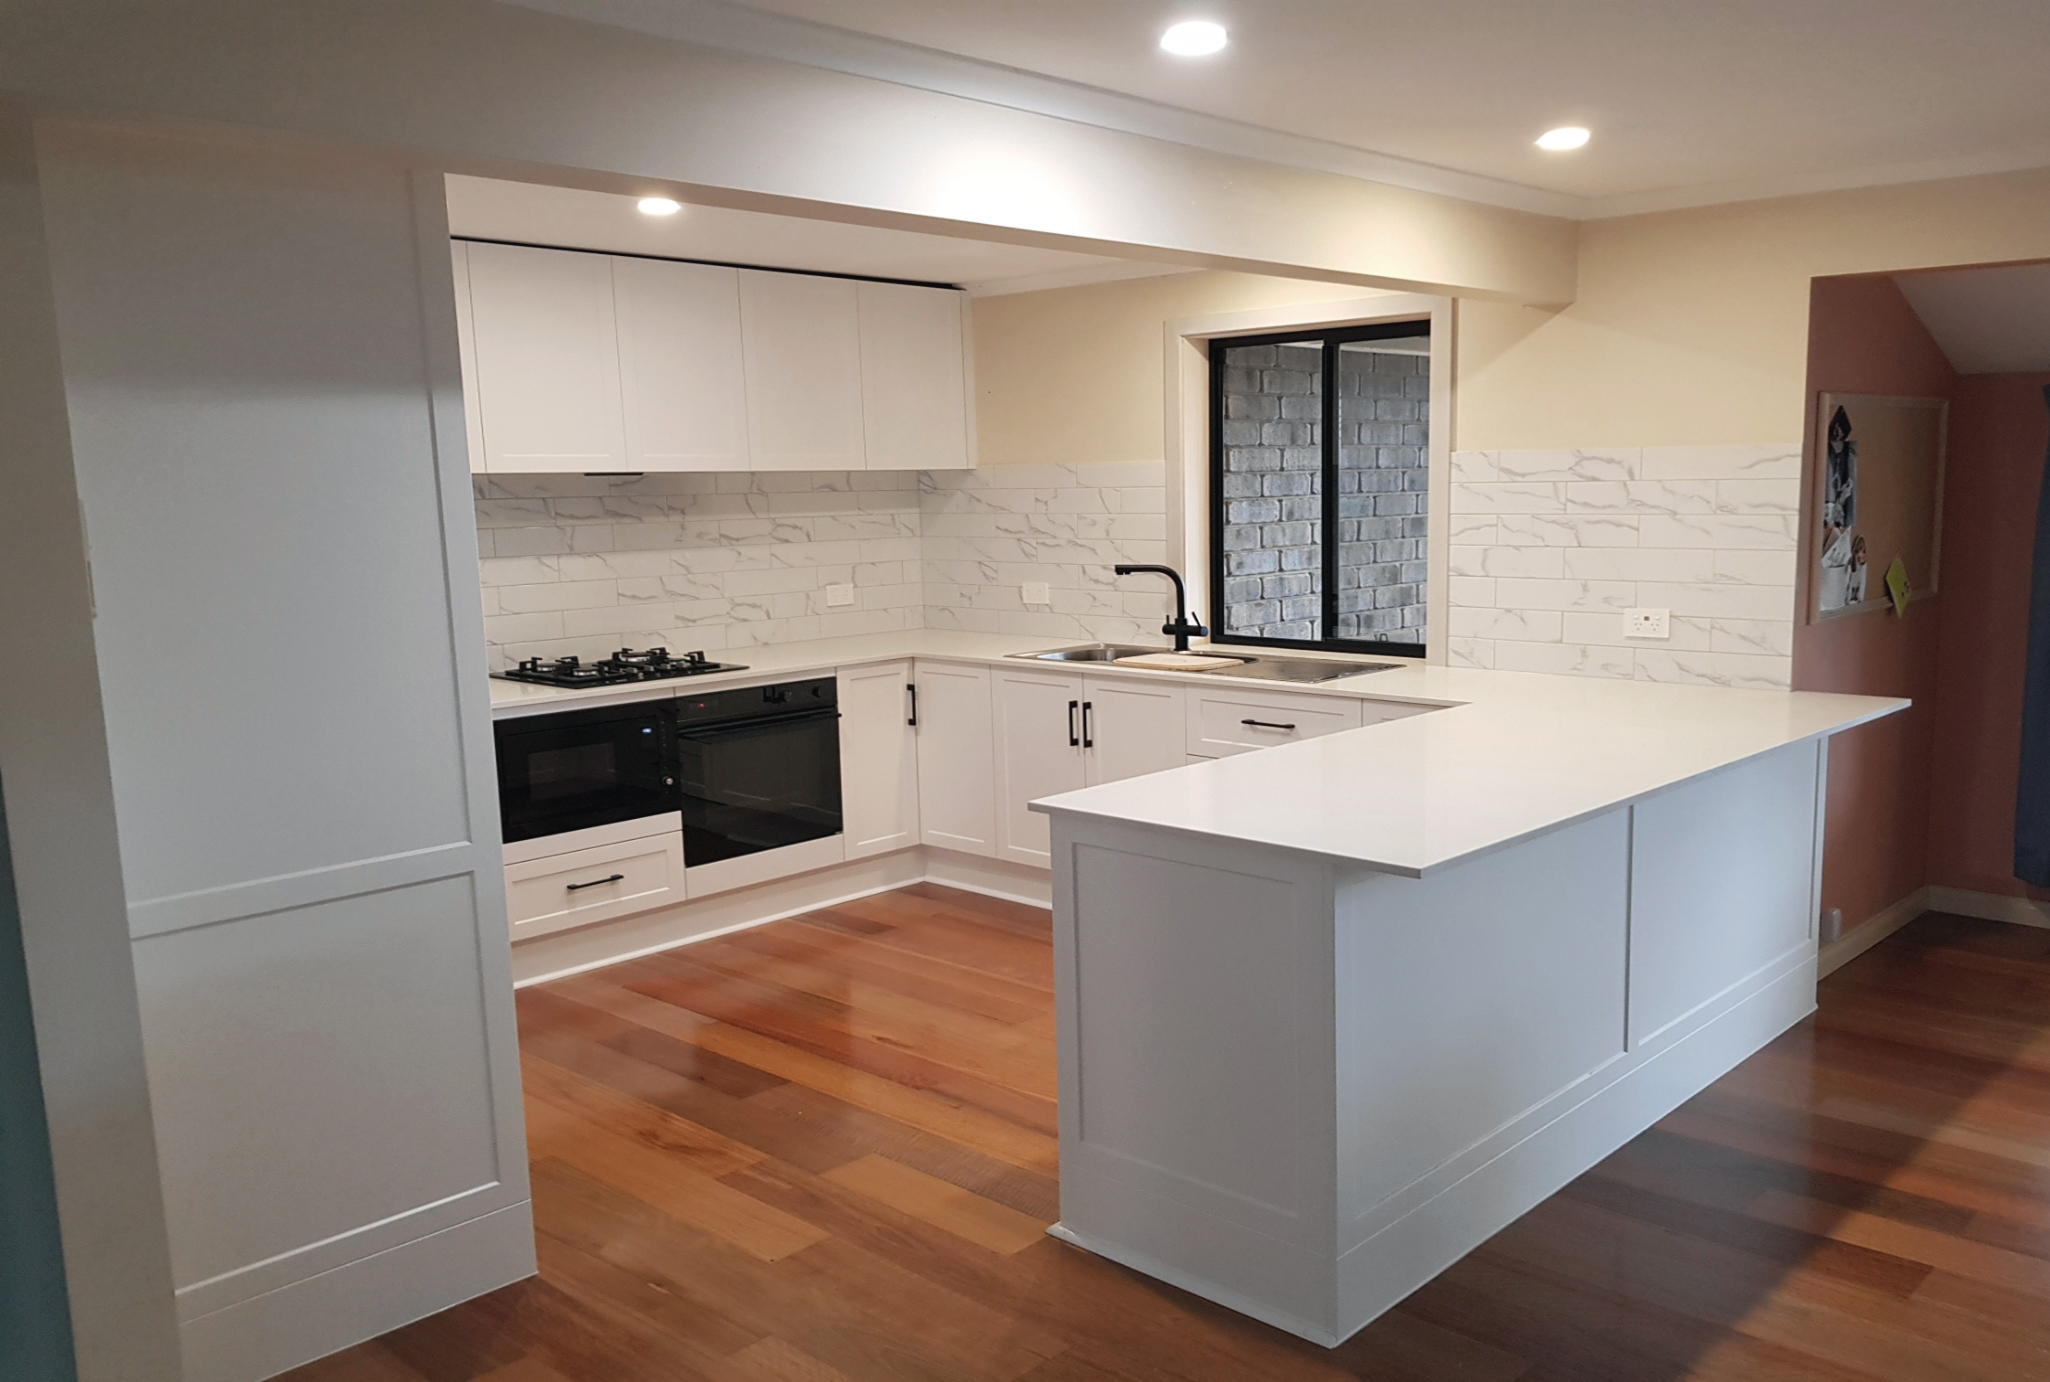 A Thermolaminated Kitchen Renovation with a Mix of Timber & Stainless Steel Benchtops, at Prospect, Nailsworth, Sefton Park, Walkerville, Hindmarsh and Vale Park, by Adelaide’s Compass Kitchens